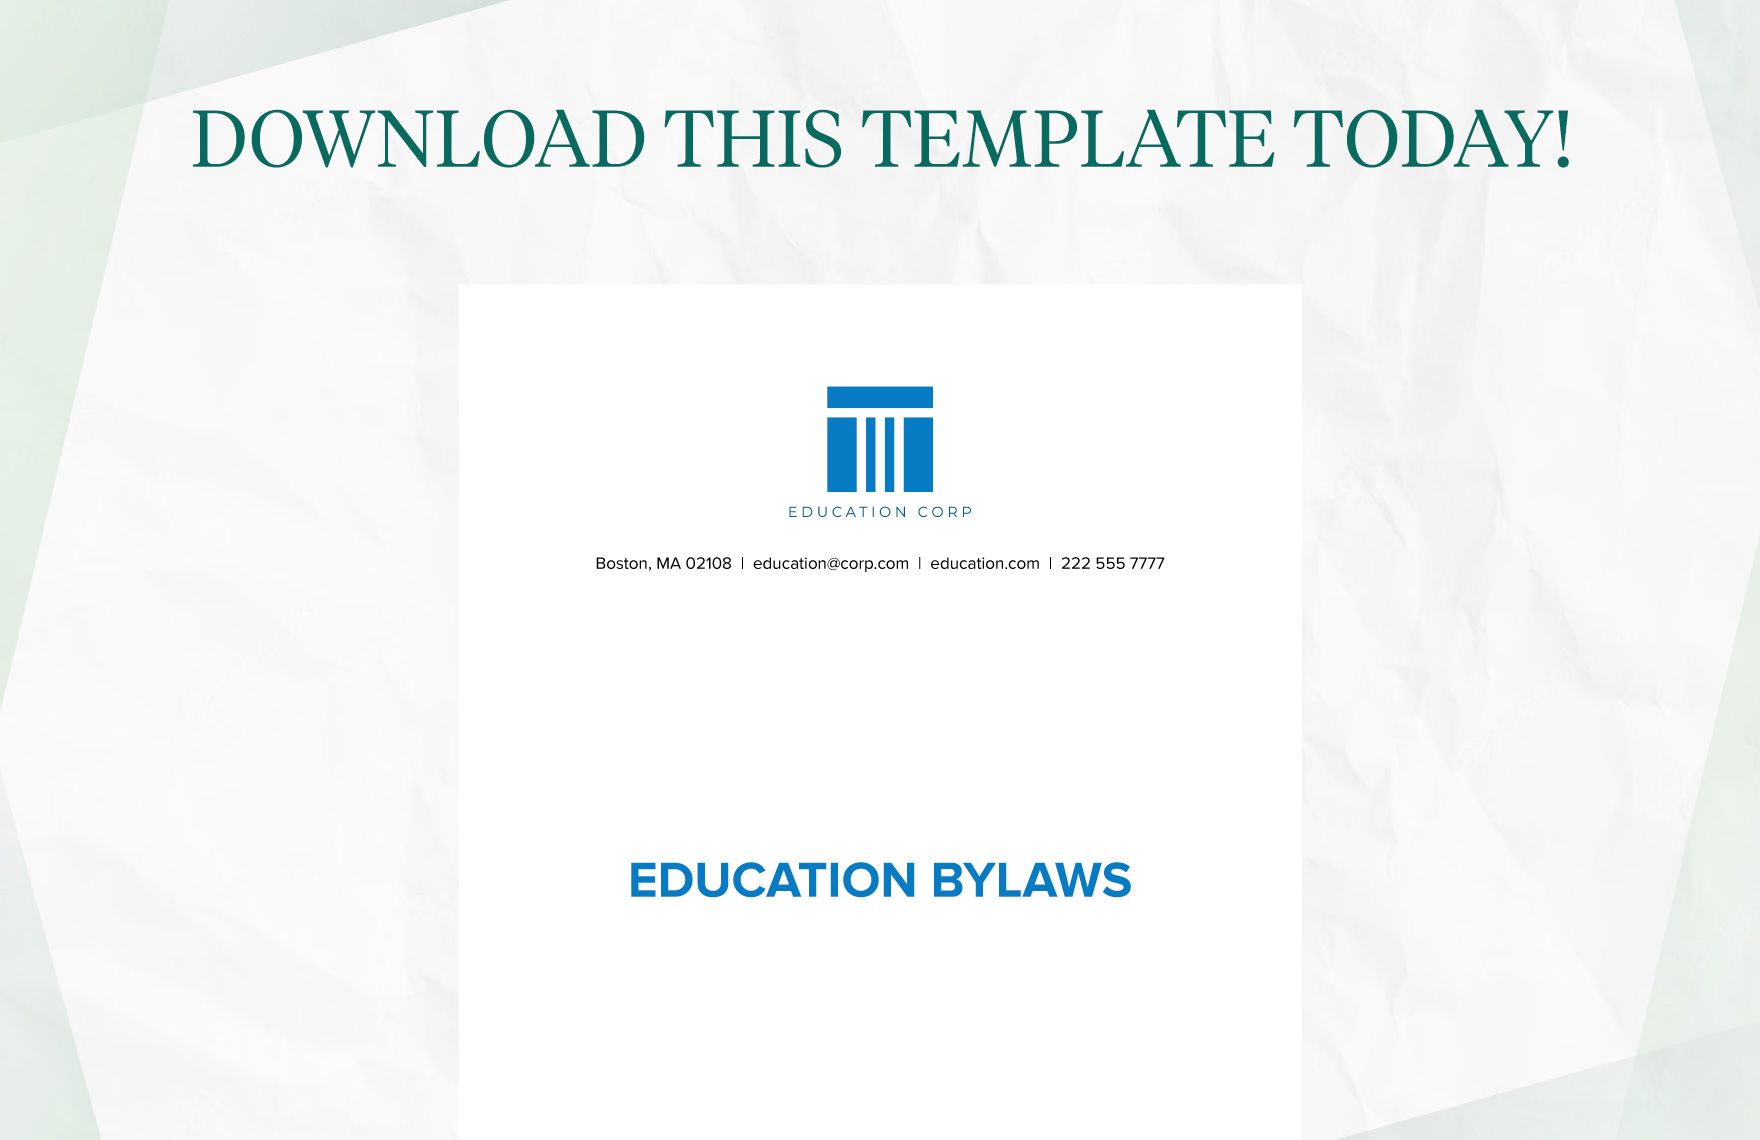 Education Bylaws Template